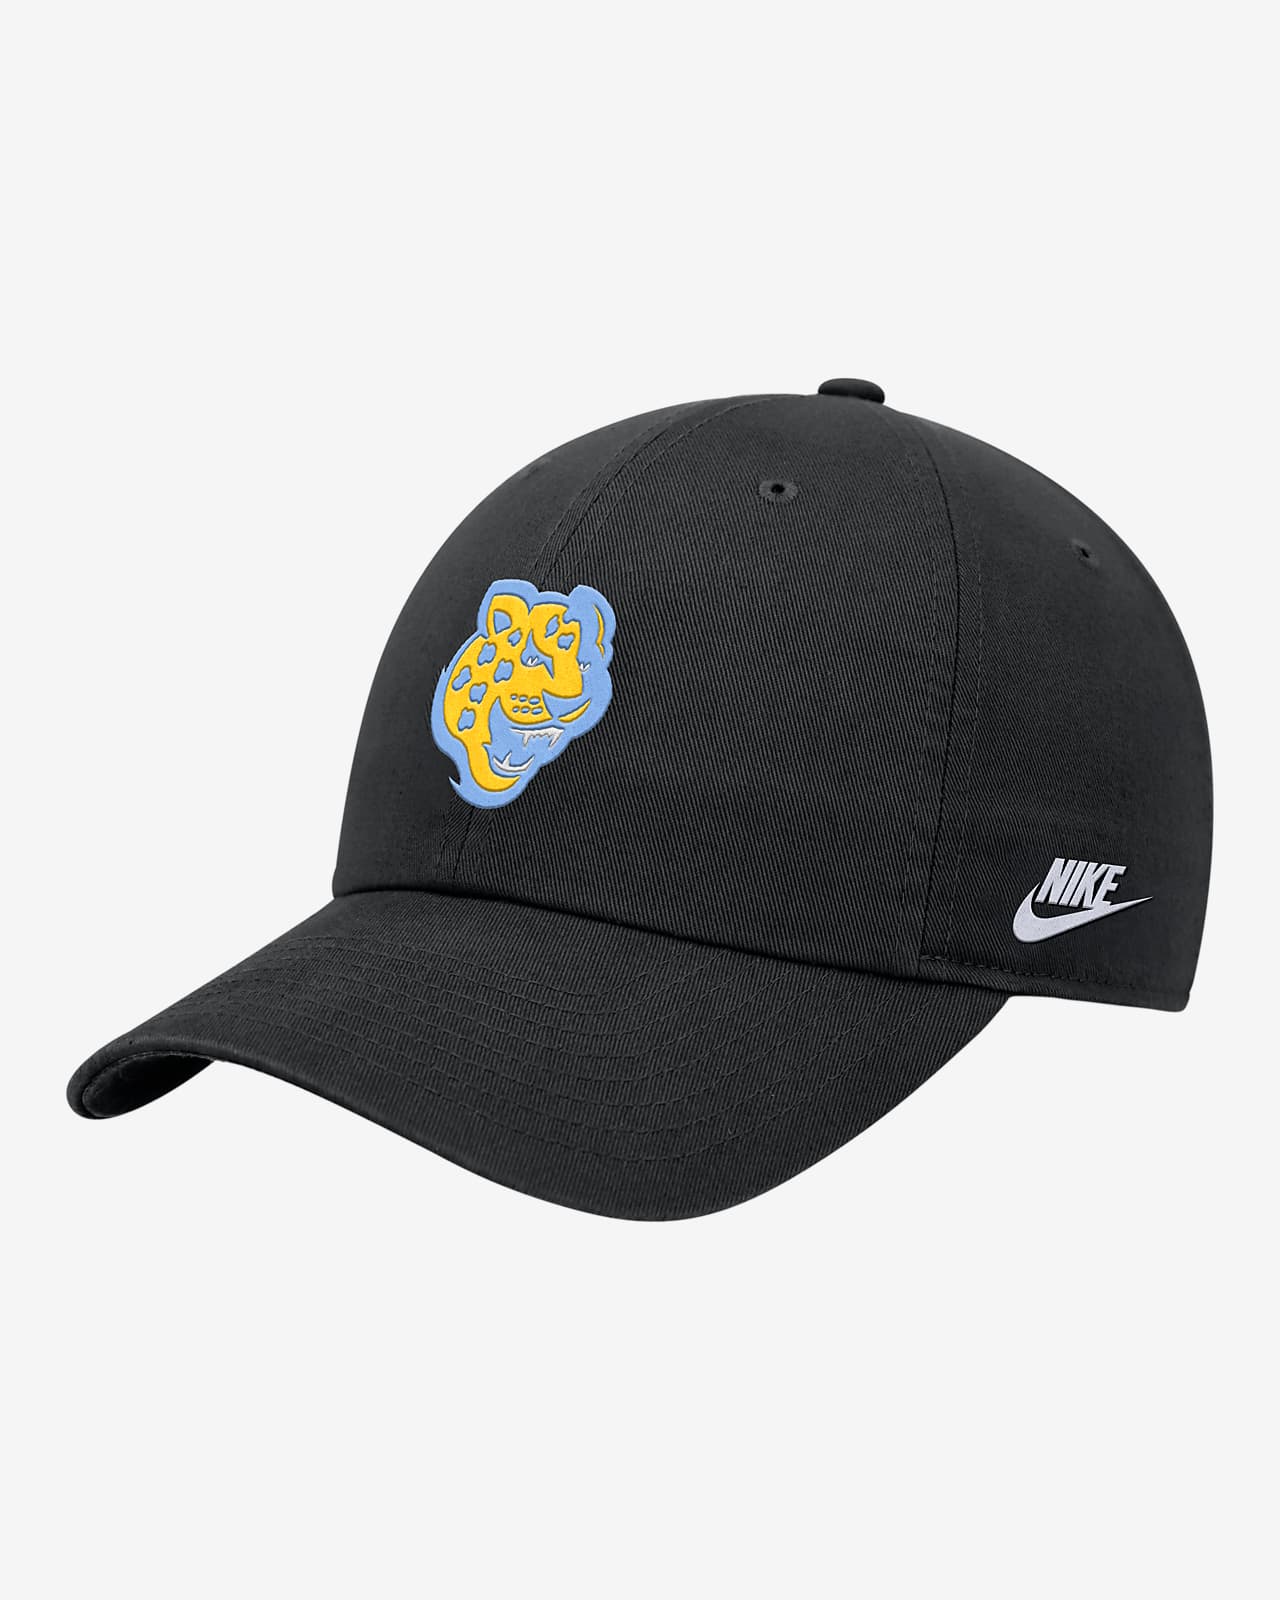 Southern Nike College Adjustable Cap